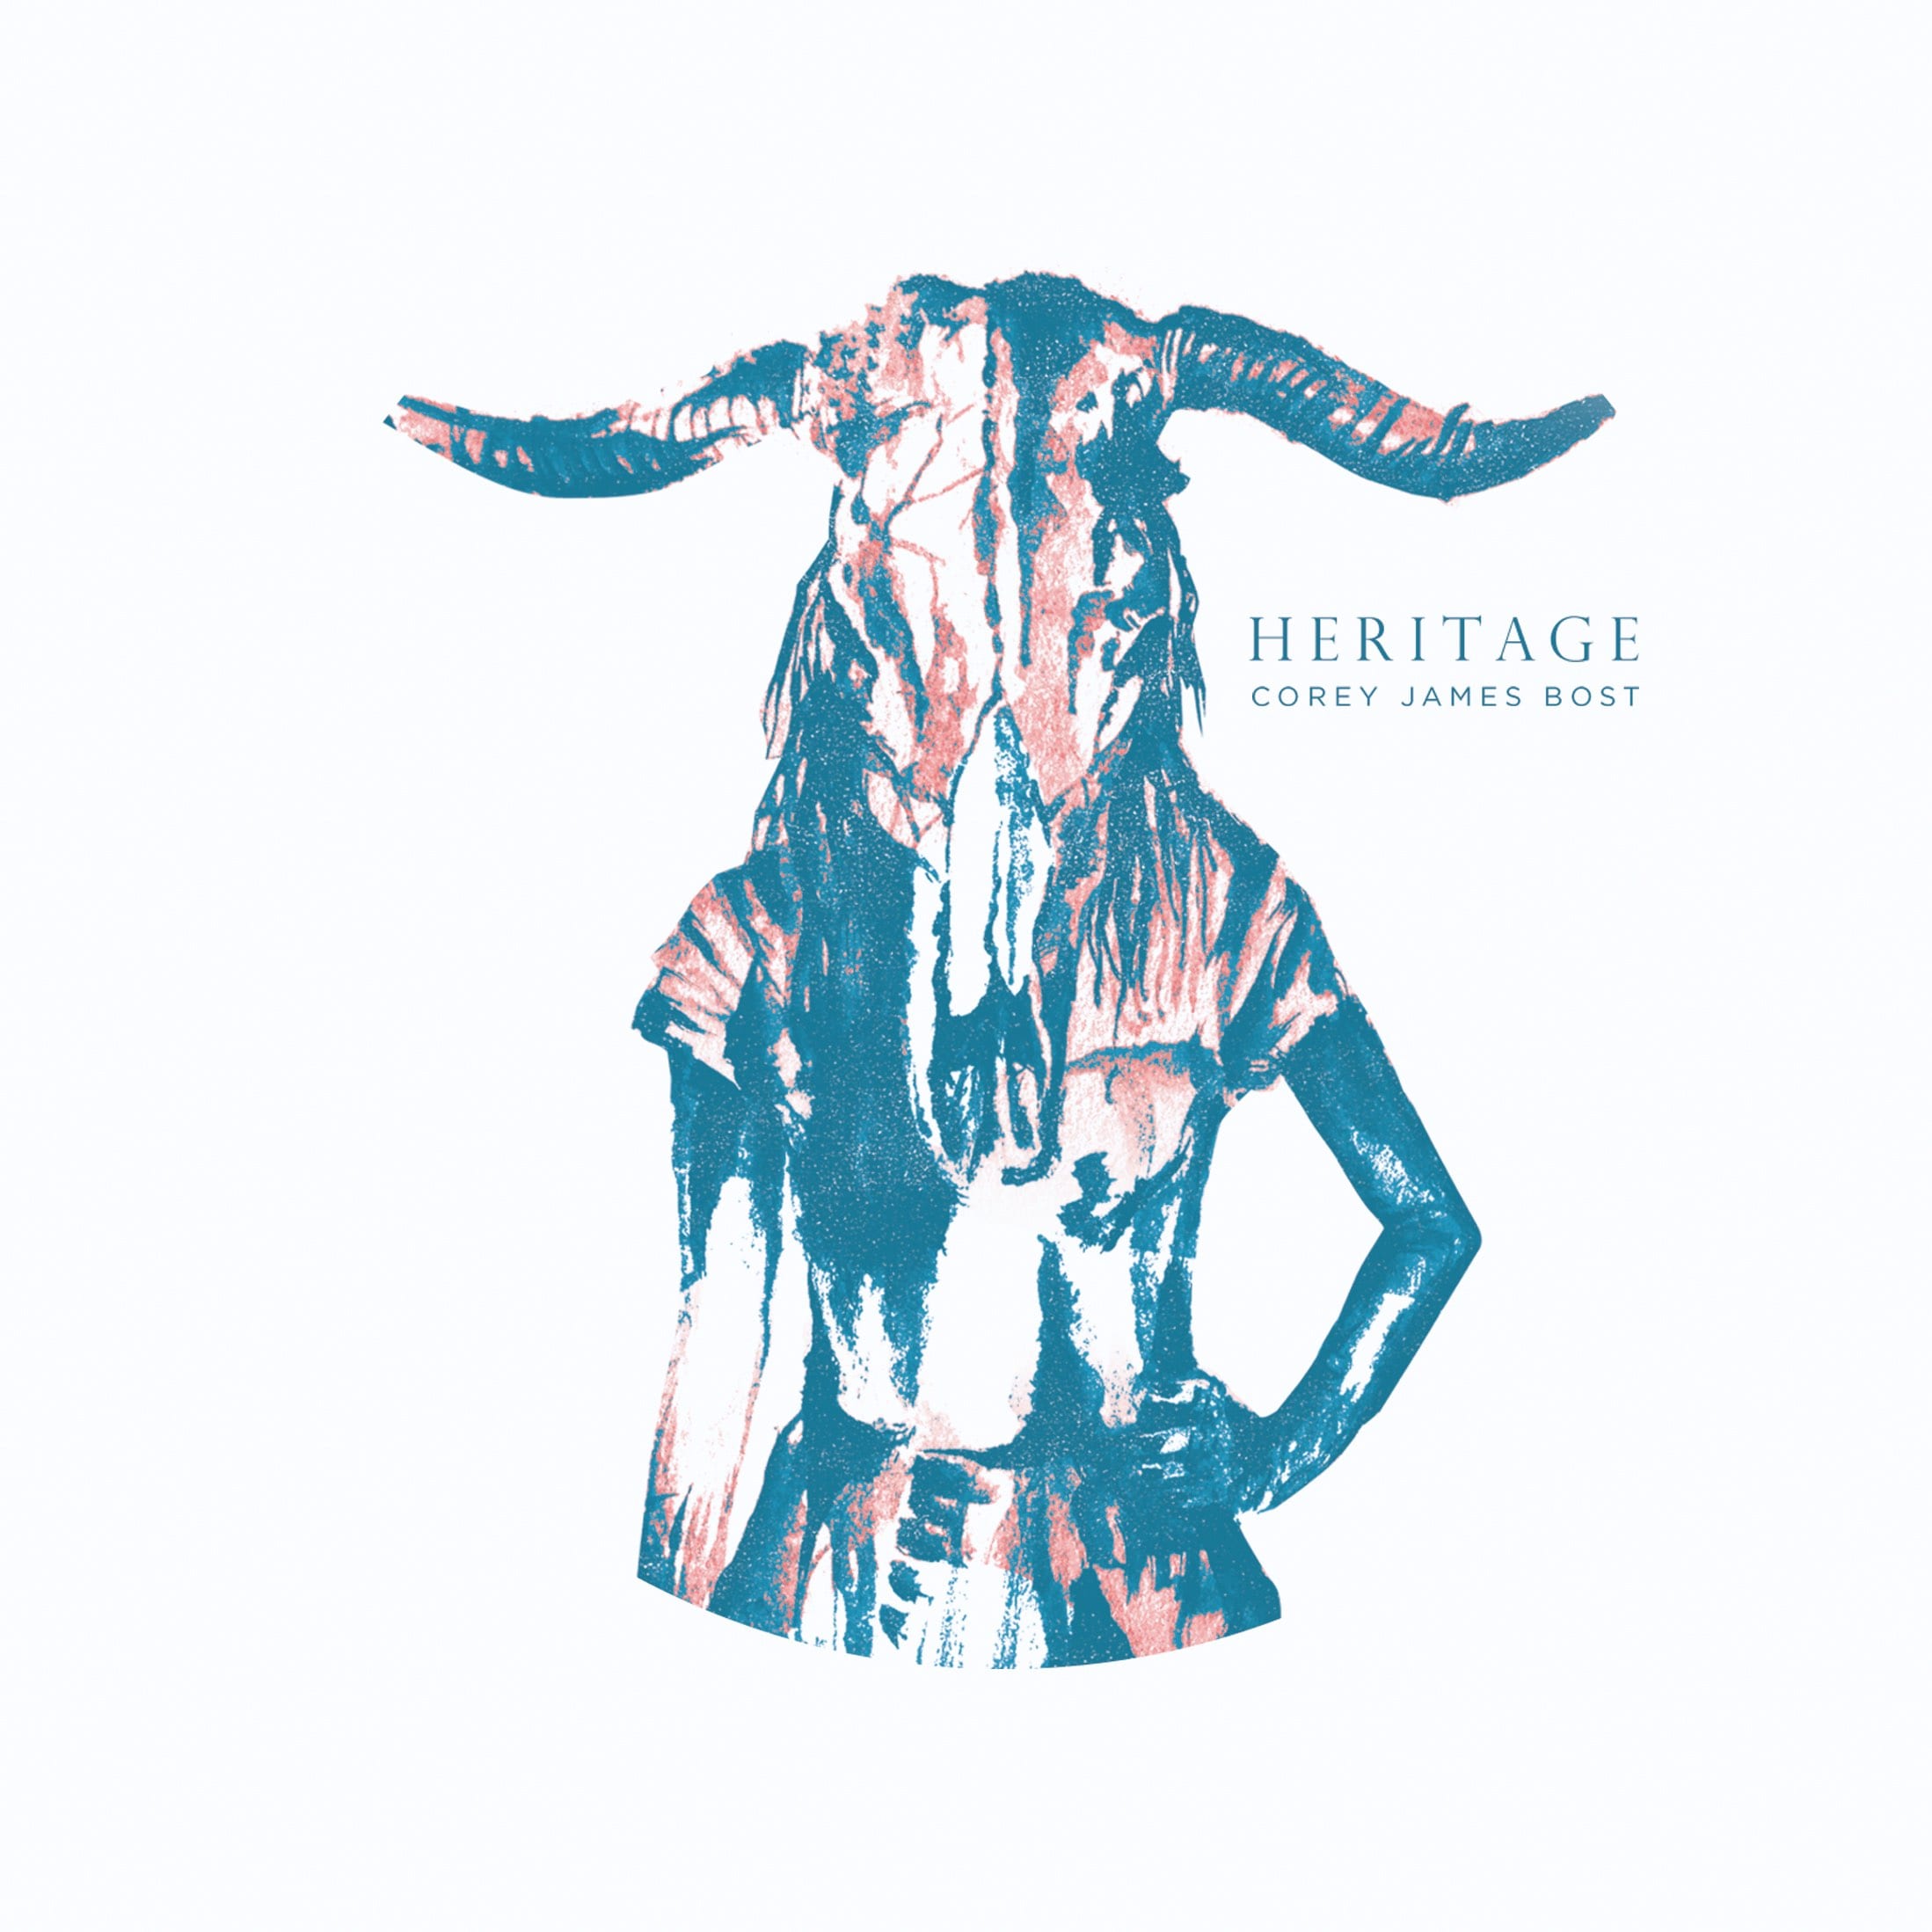 Heritage Corey James Bost Artist Profile graphic of person wearing cattle skull